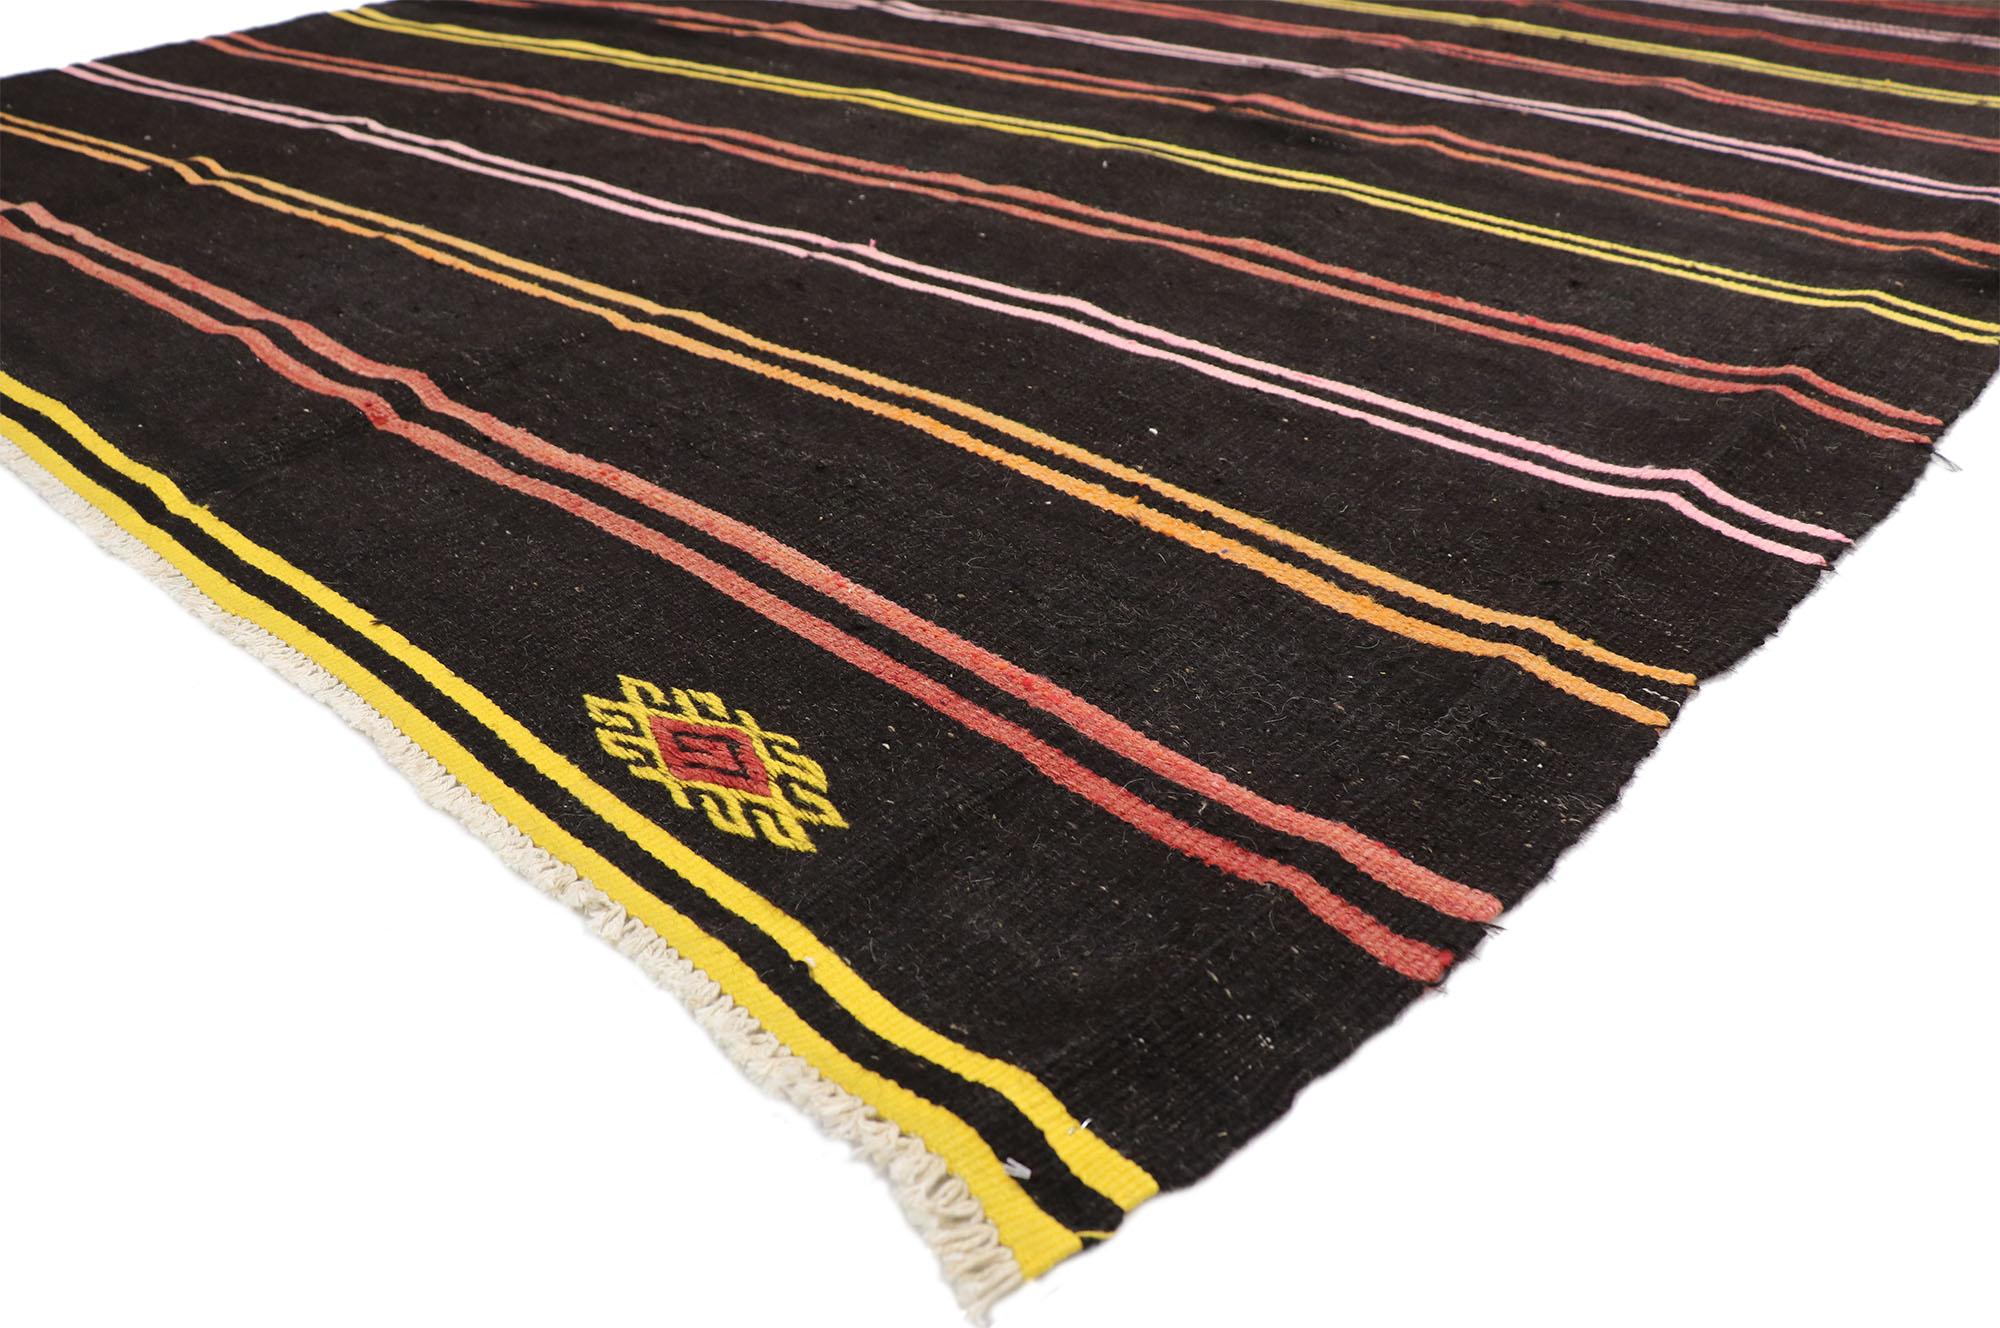 51304 vintage Turkish Striped Kilim rug with Tribal Bohemian style, flat-weave rug. This handwoven wool vintage Turkish striped Kilim rug features double colored bands in vibrant colors dotted with symbolic Turkish motifs on a warm brown background.